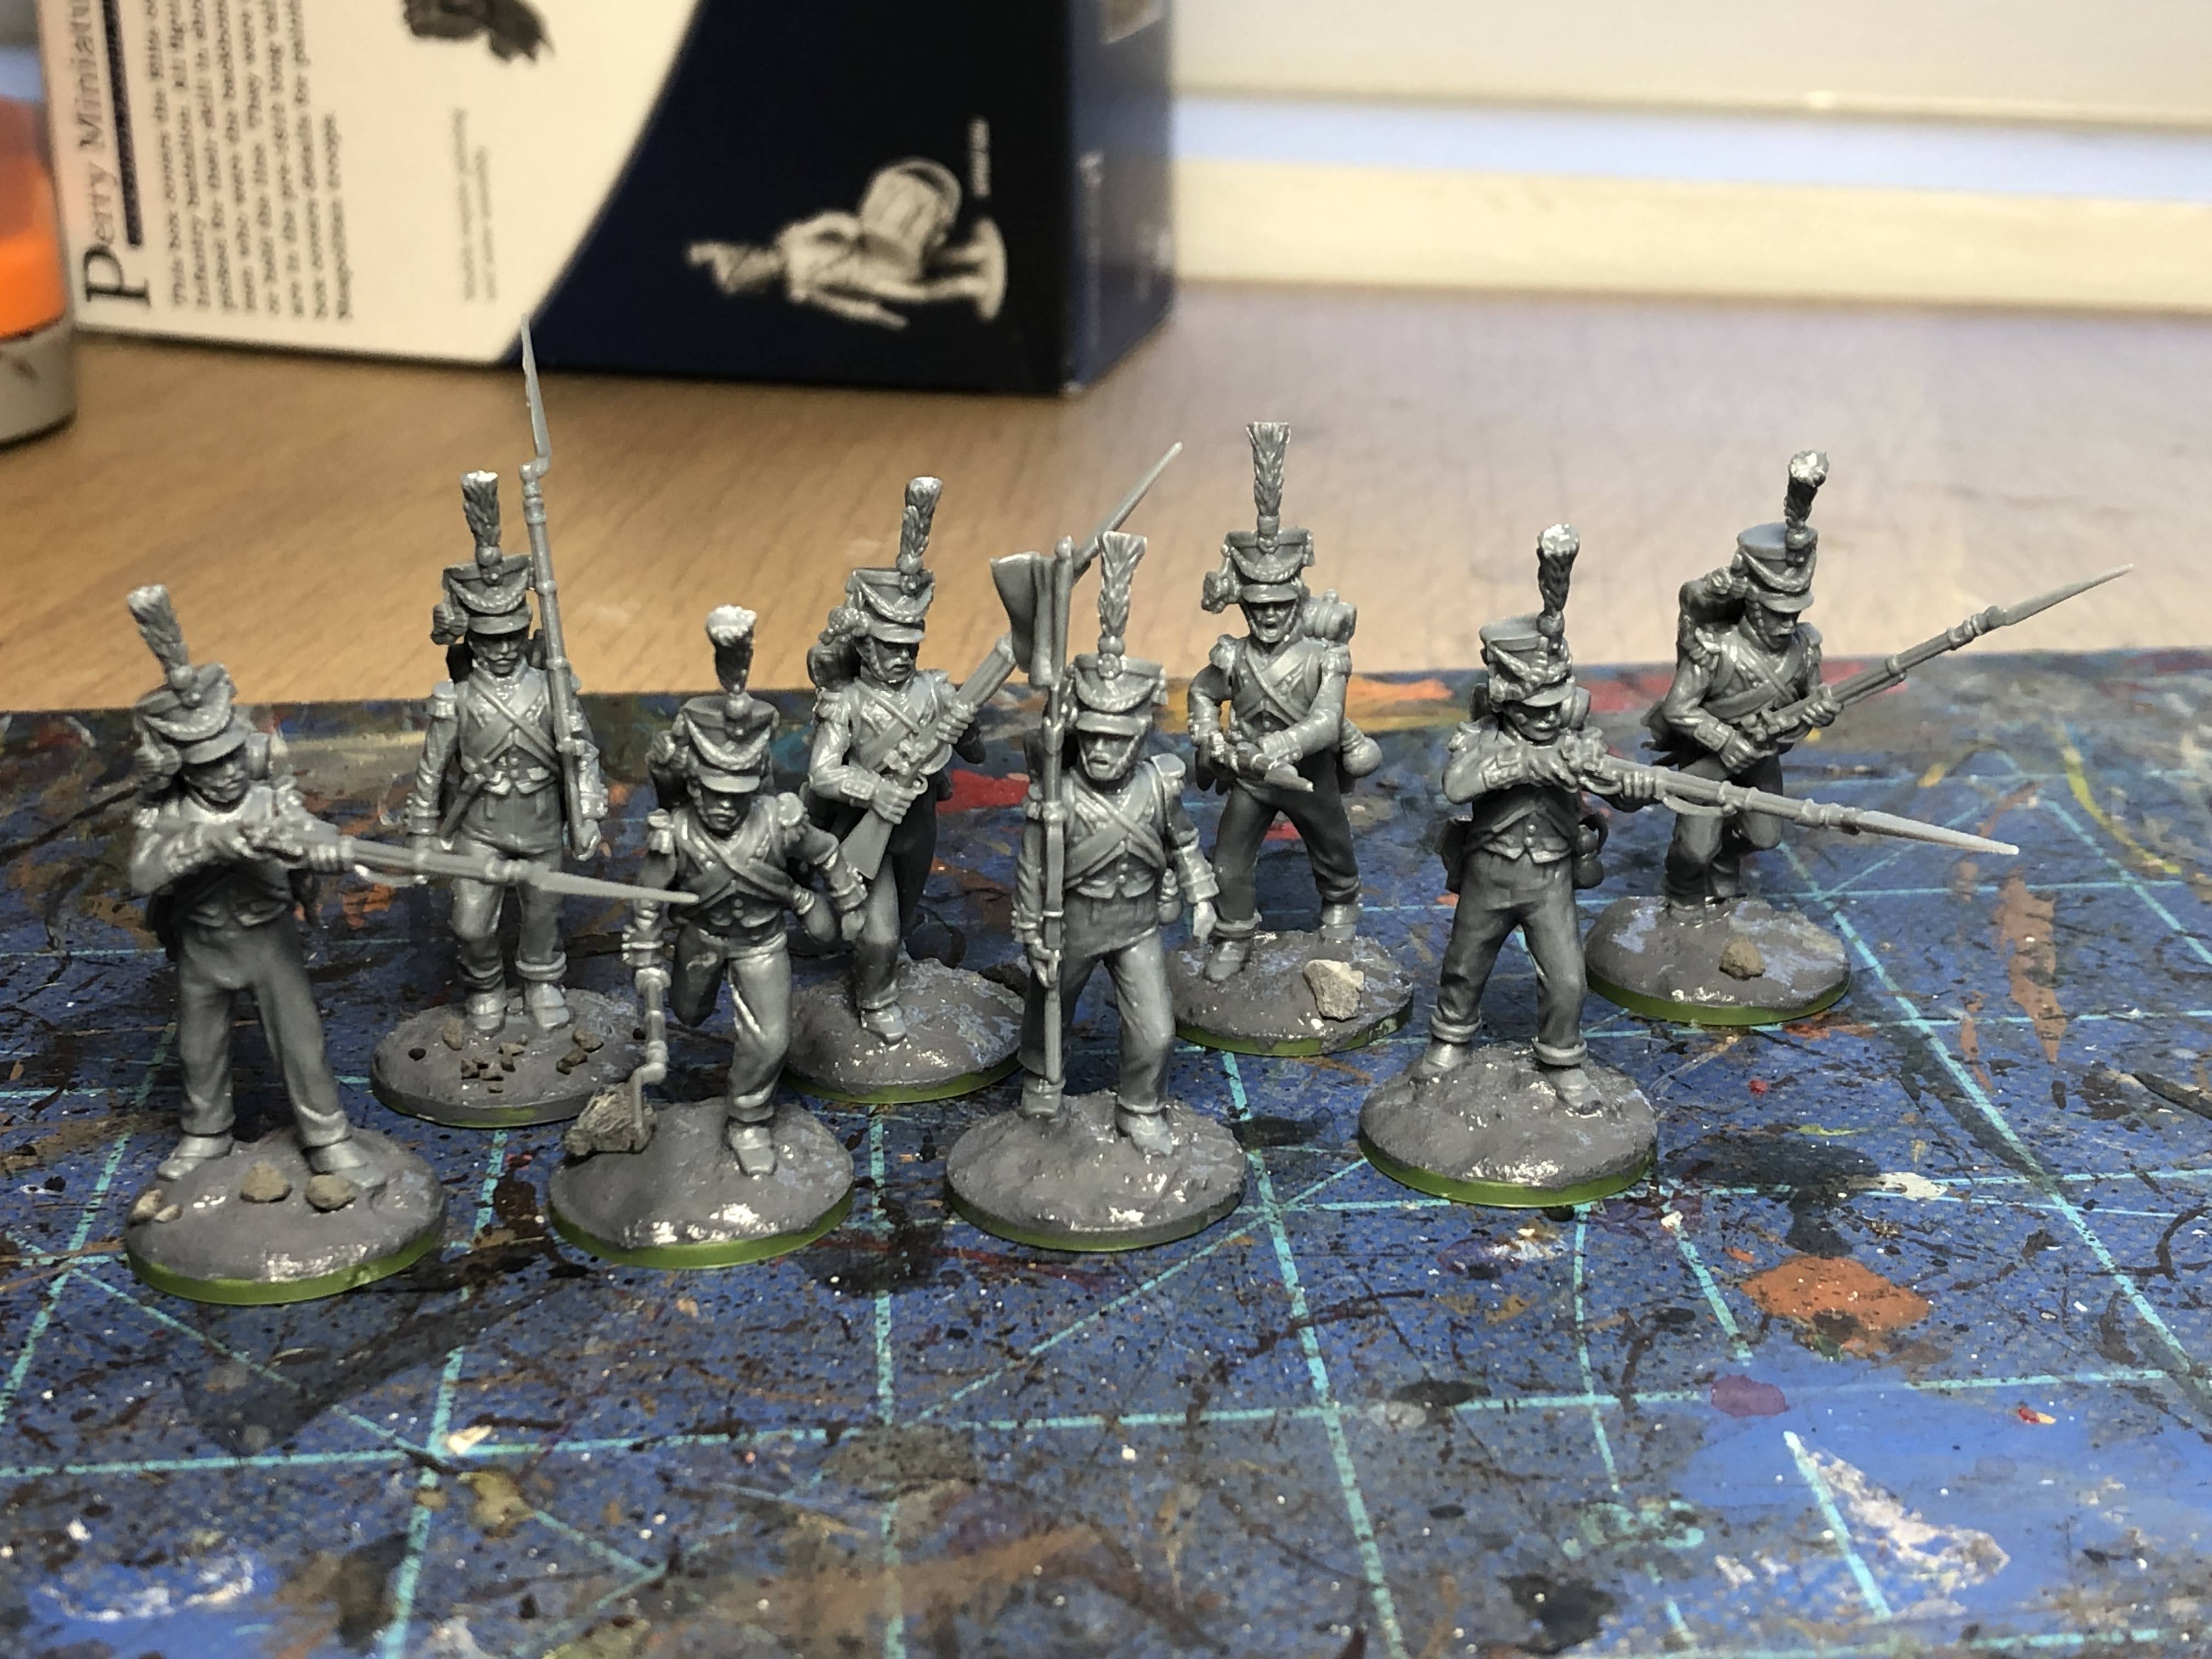 Historicals Miniature Review: Perry Miniatures Foot Knights (1450-1500)